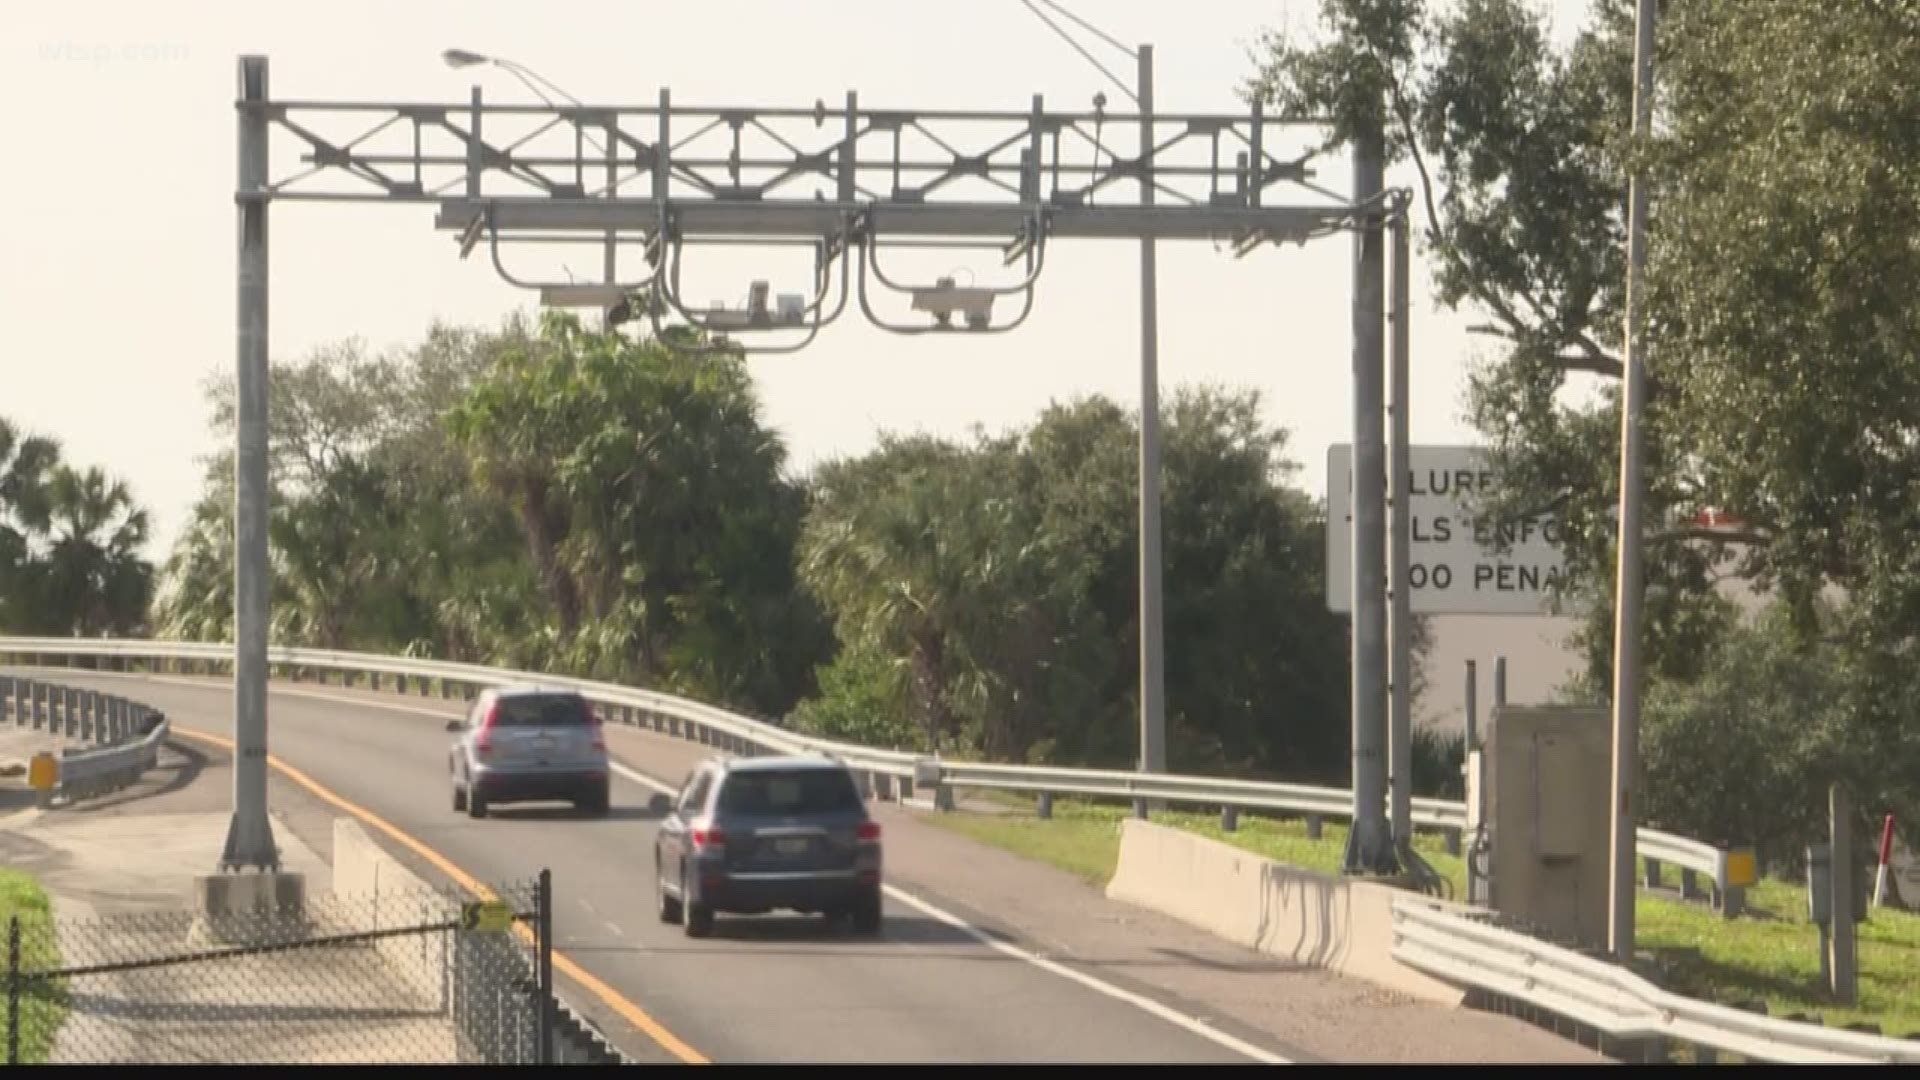 There is another potential issue for those who use the pay-by-plate option on area toll roads.